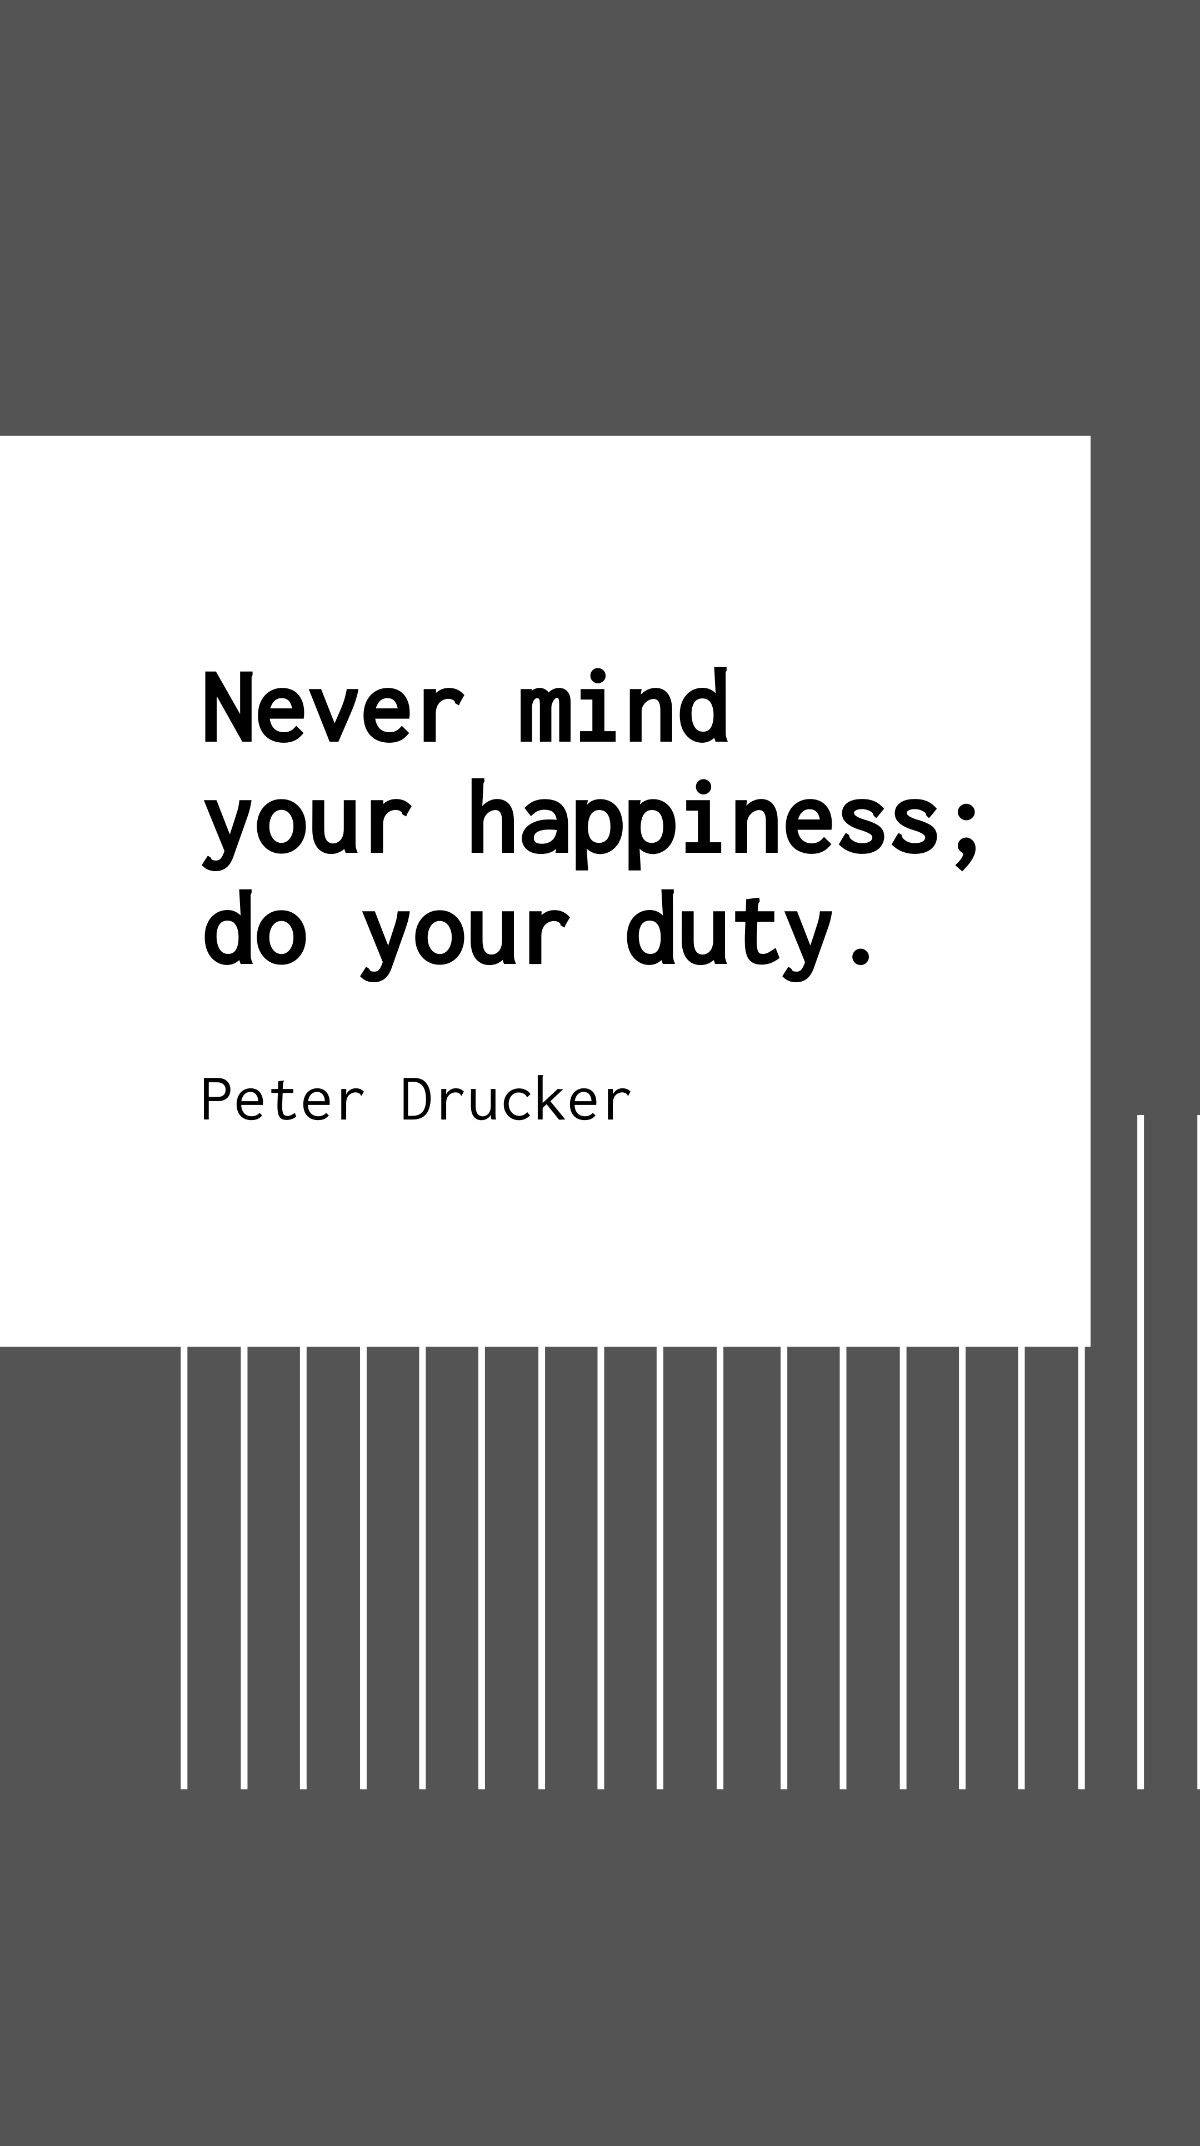 Peter Drucker - Never mind your happiness; do your duty. Template